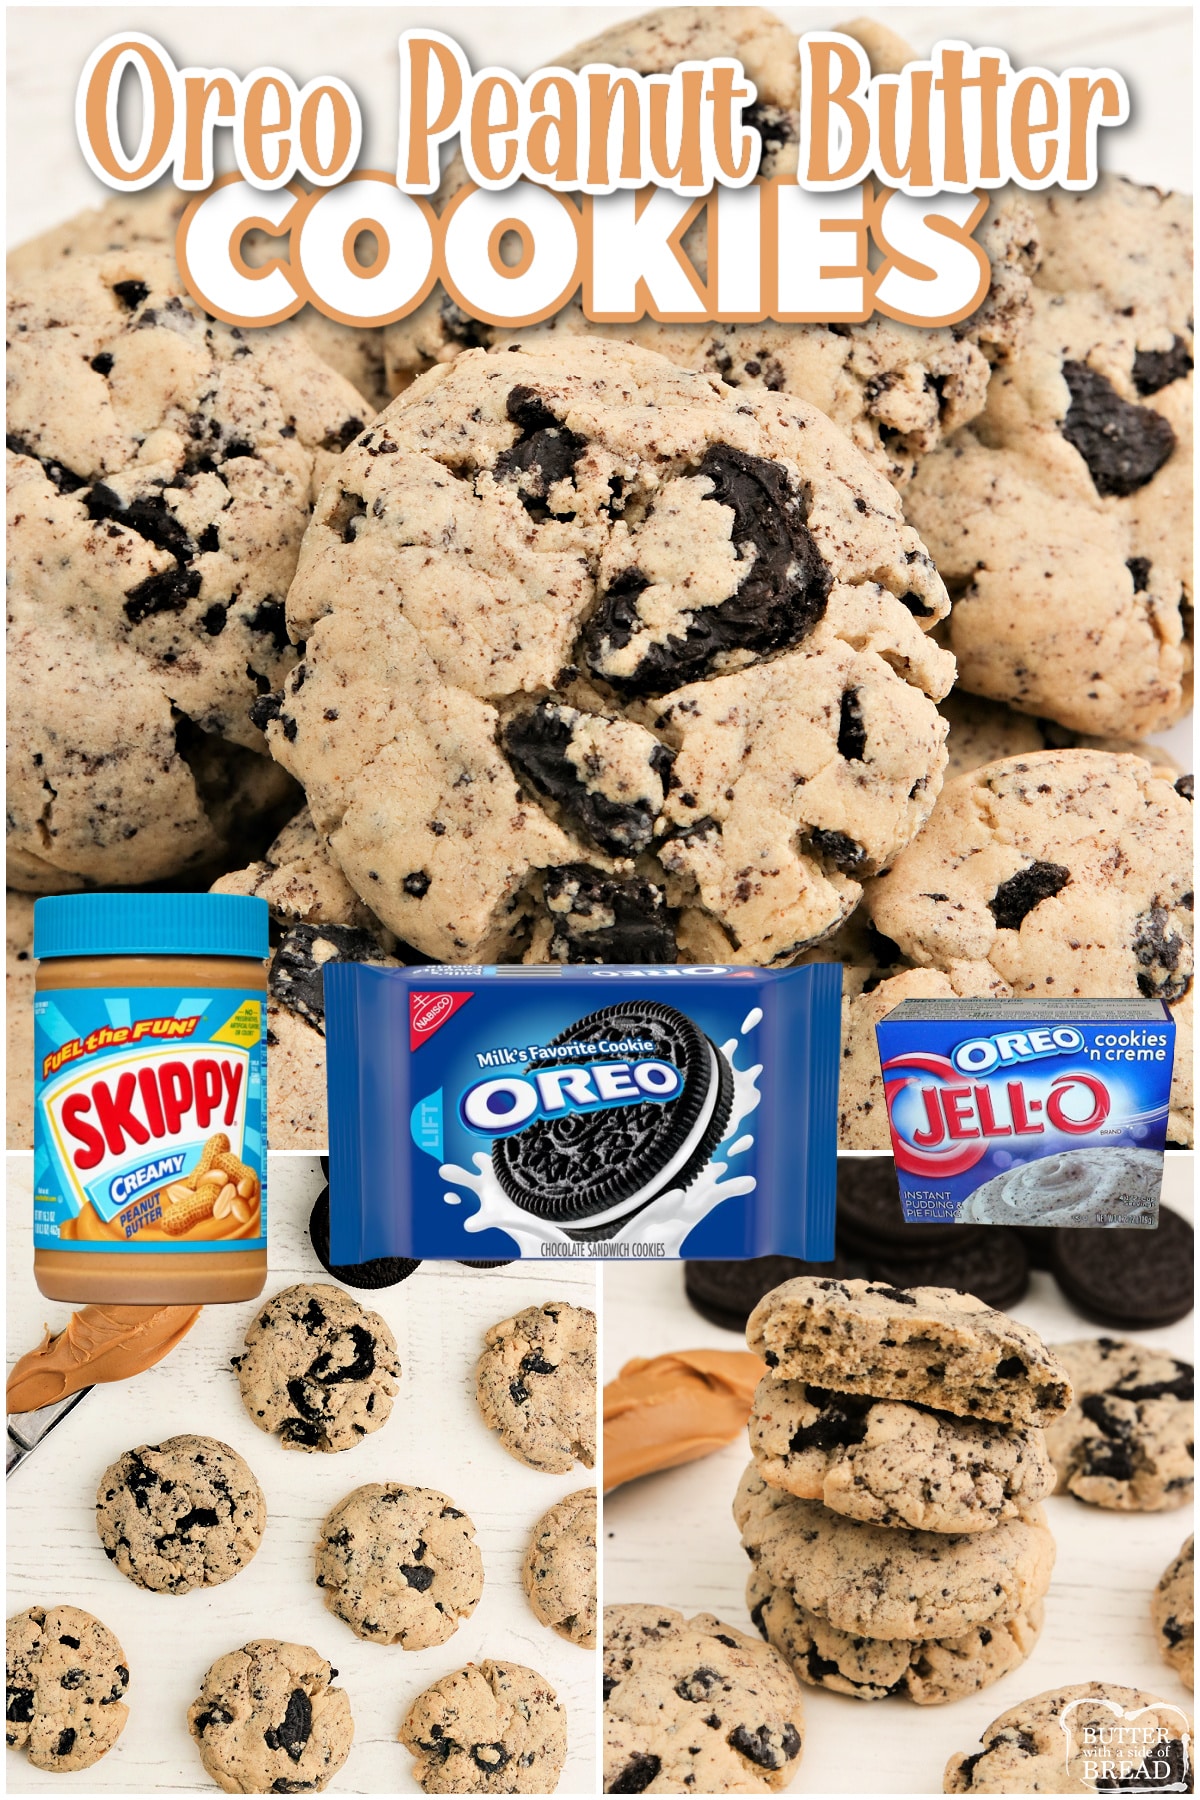 Oreo Peanut Butter Cookies are soft and chewy peanut butter cookies made with Oreo pudding mix and crushed Oreo cookies. 